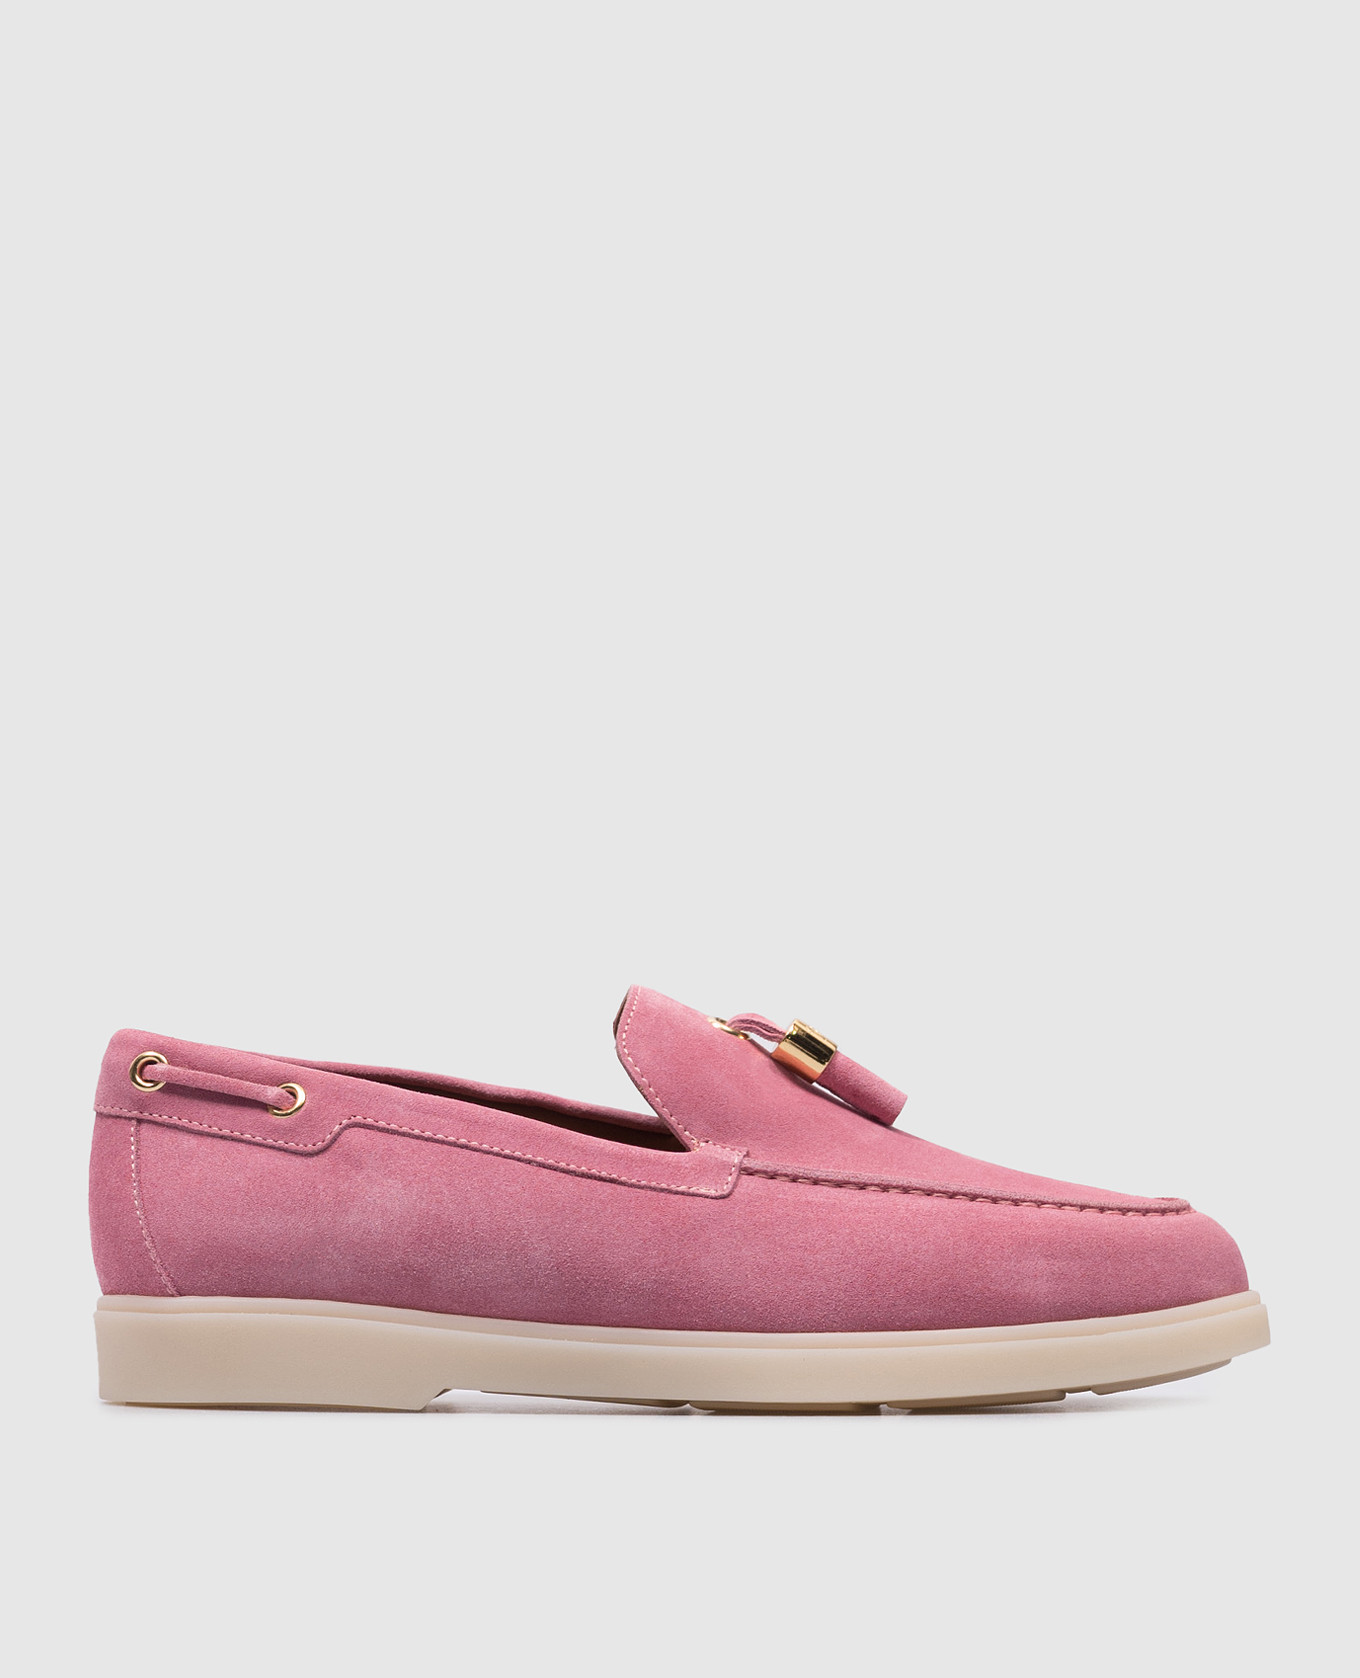 Avela pink suede loafers